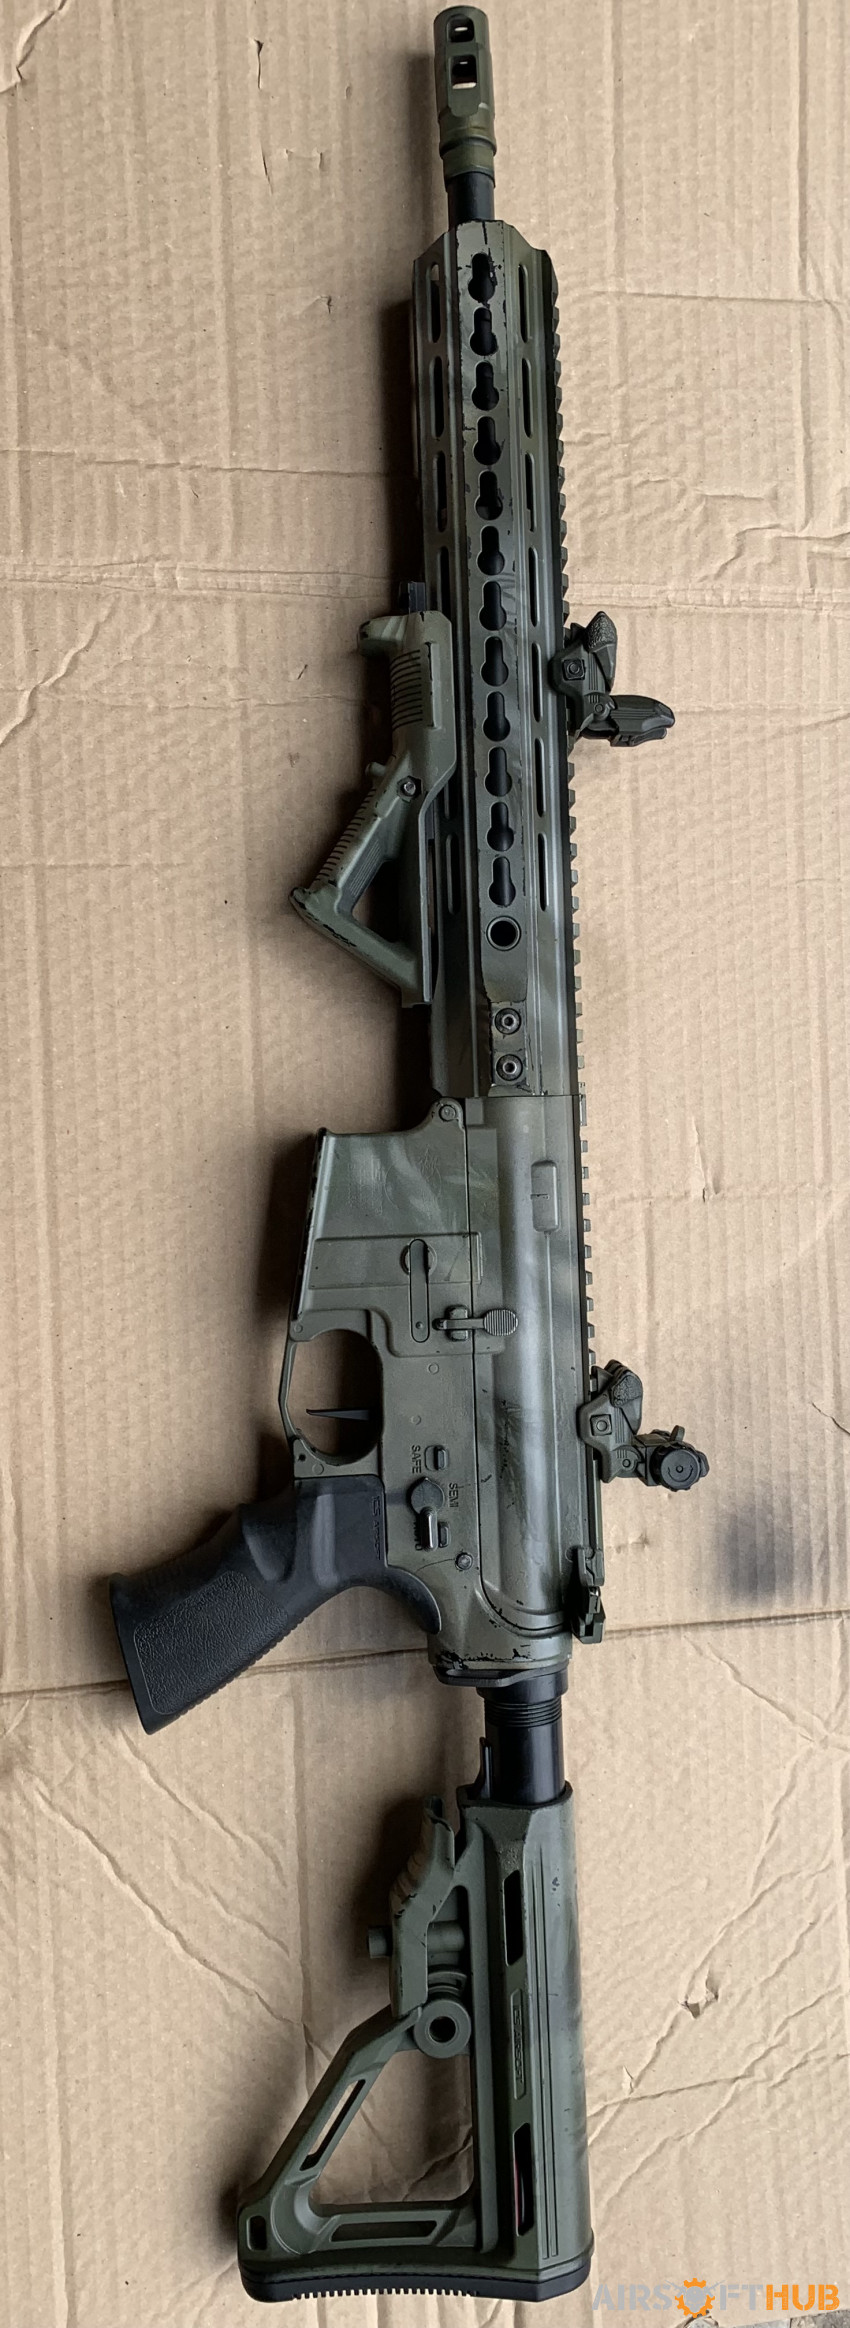 Ics cxp uk1r with upgrades - Used airsoft equipment